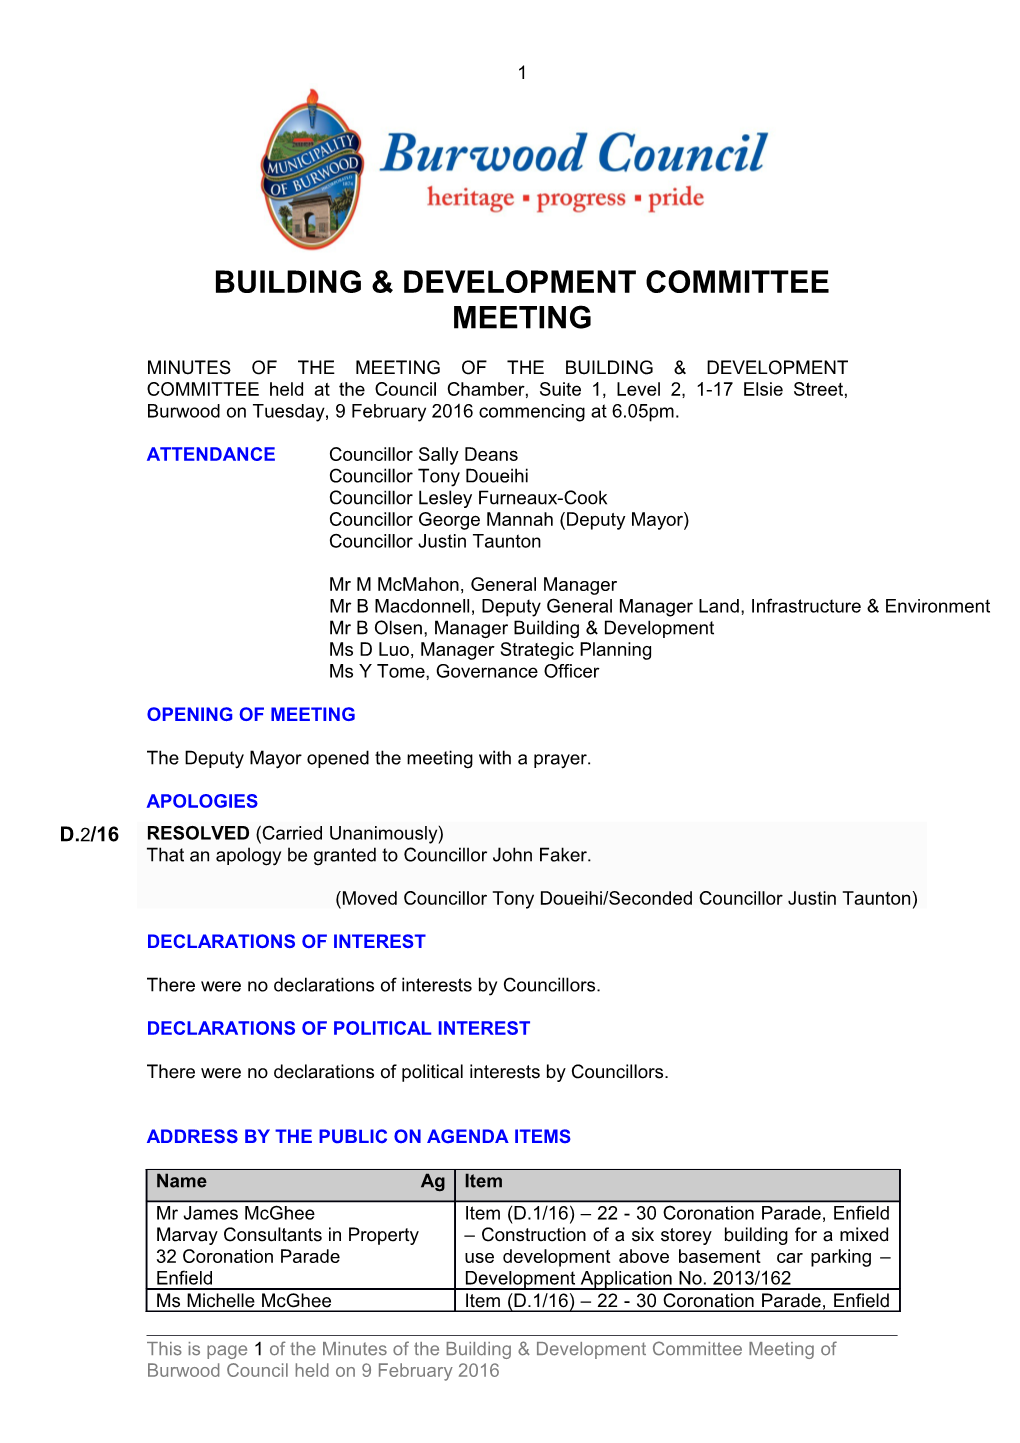 Pro-Forma Minutes of Building & Development Committee Meeting - 9 February 2016